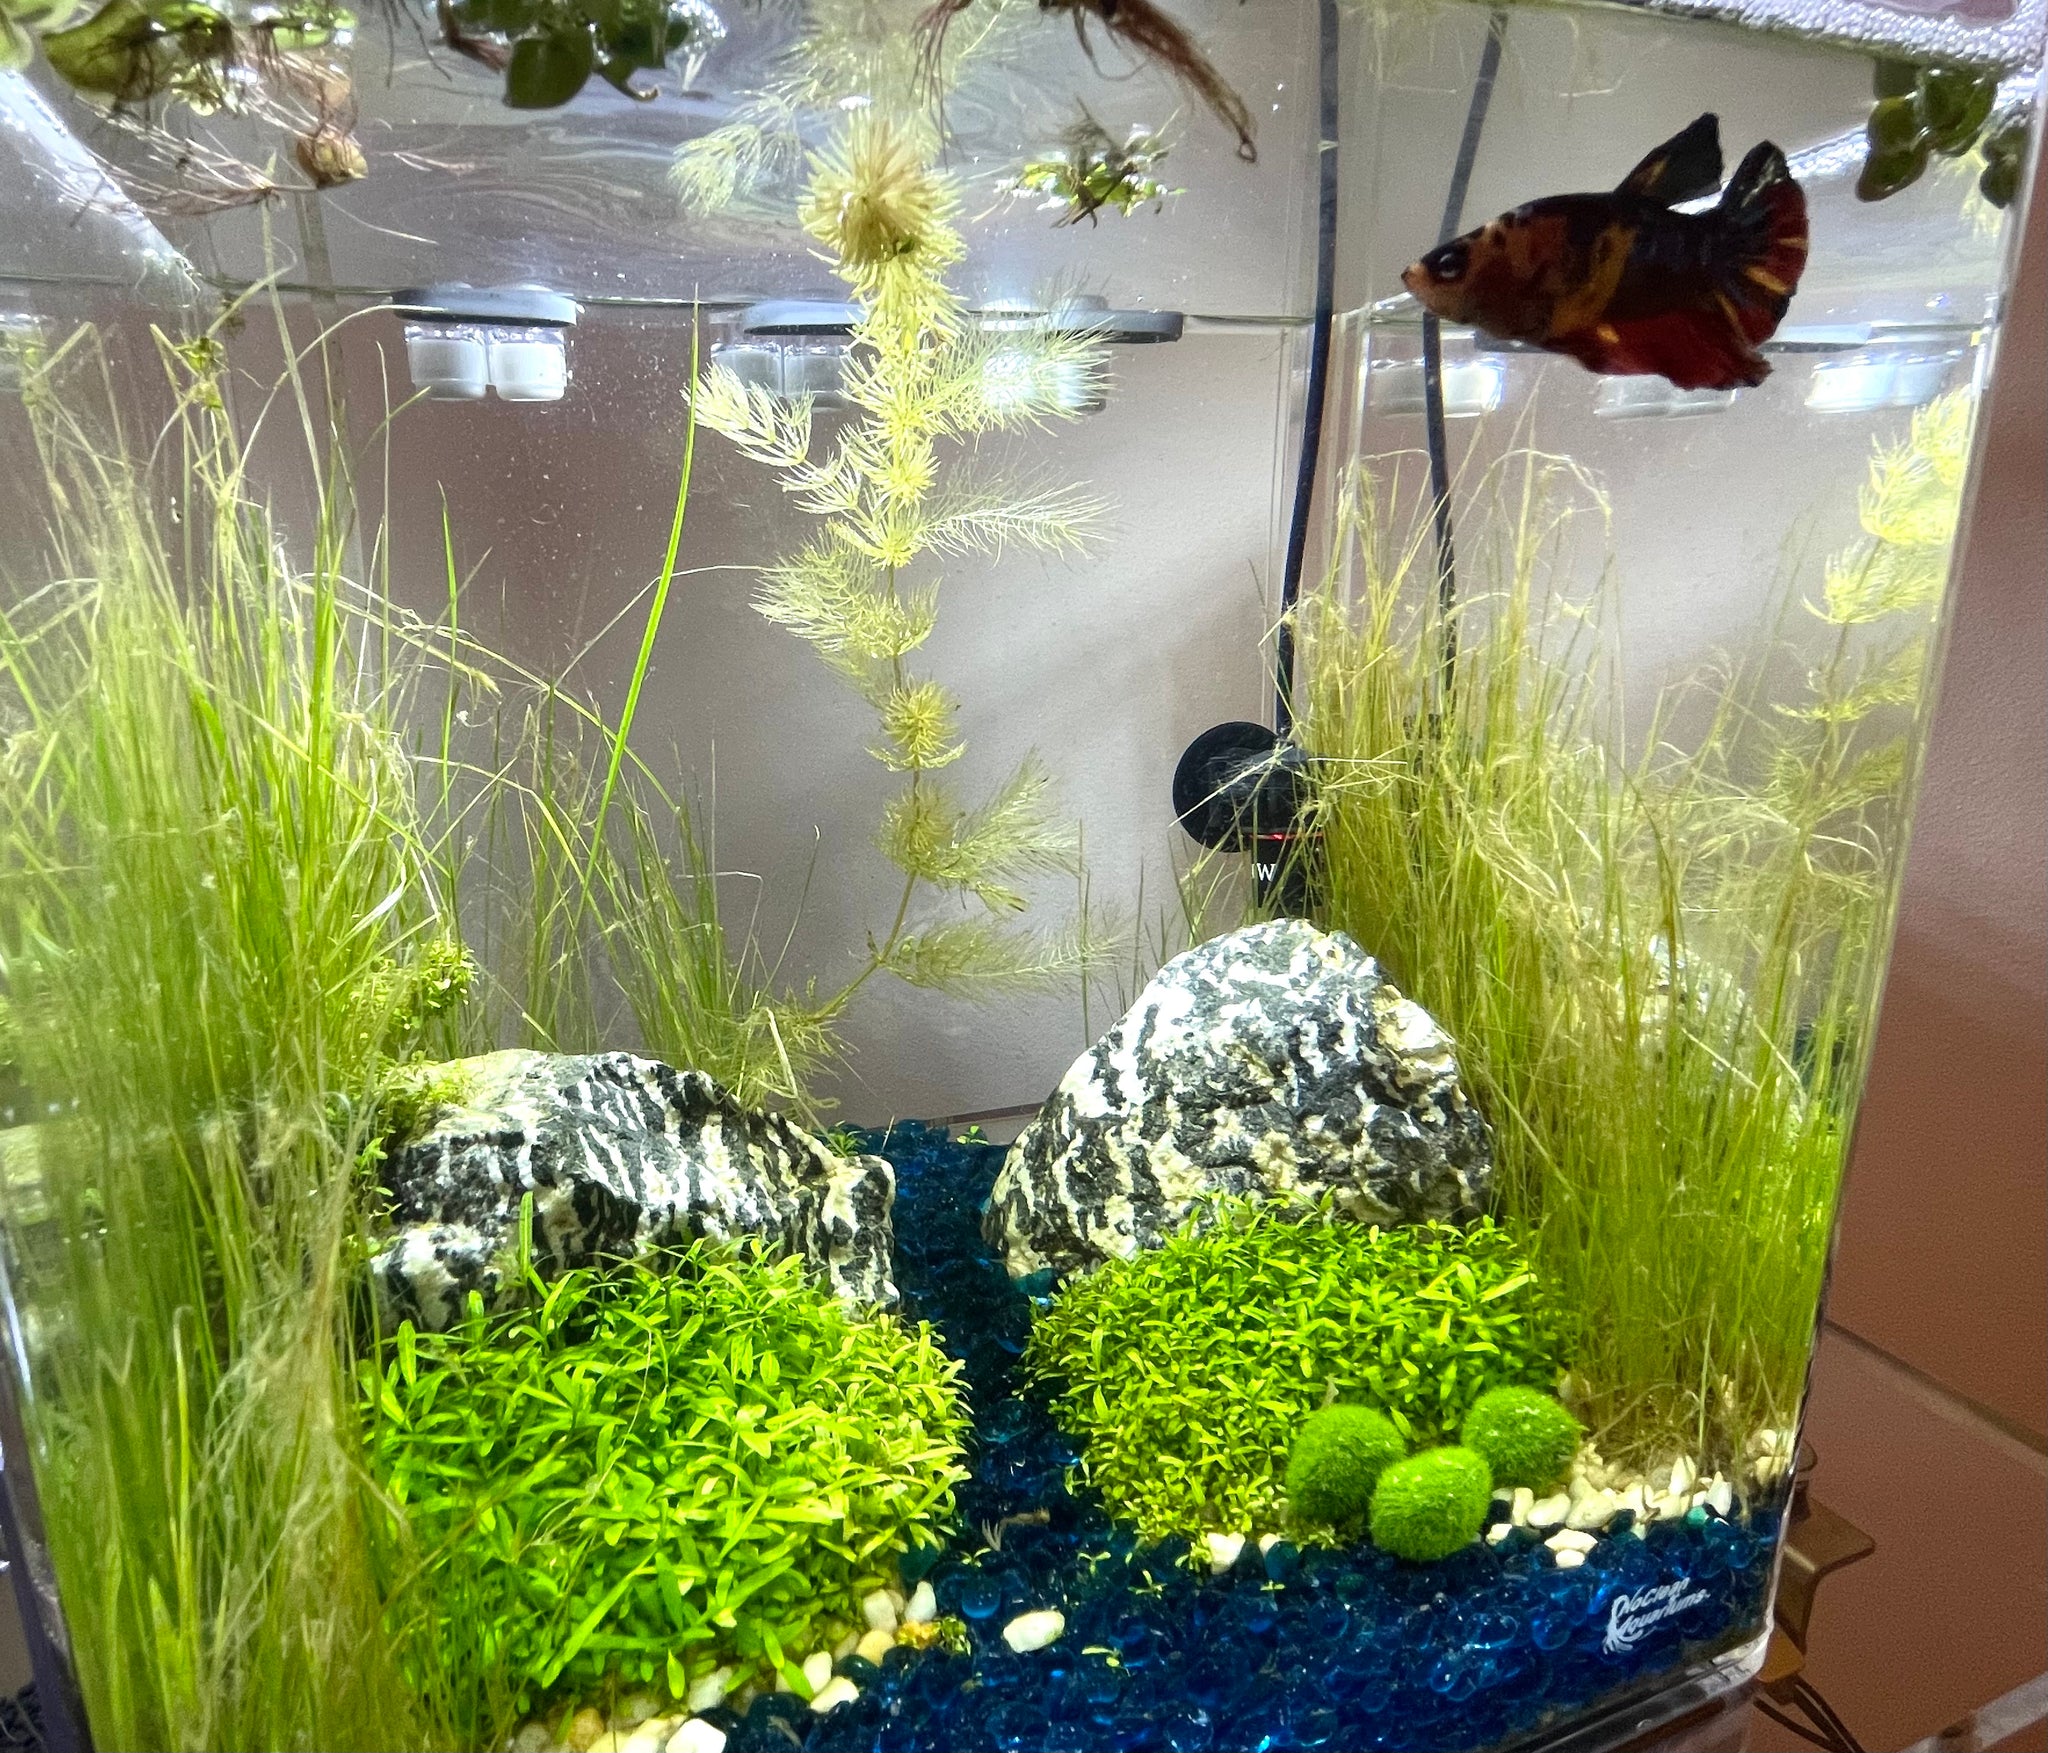 Can I pull apart marimo moss balls and use them to do other things in my  aquarium like carpeting rock decorations or the floor, or will they just  ball up again? 